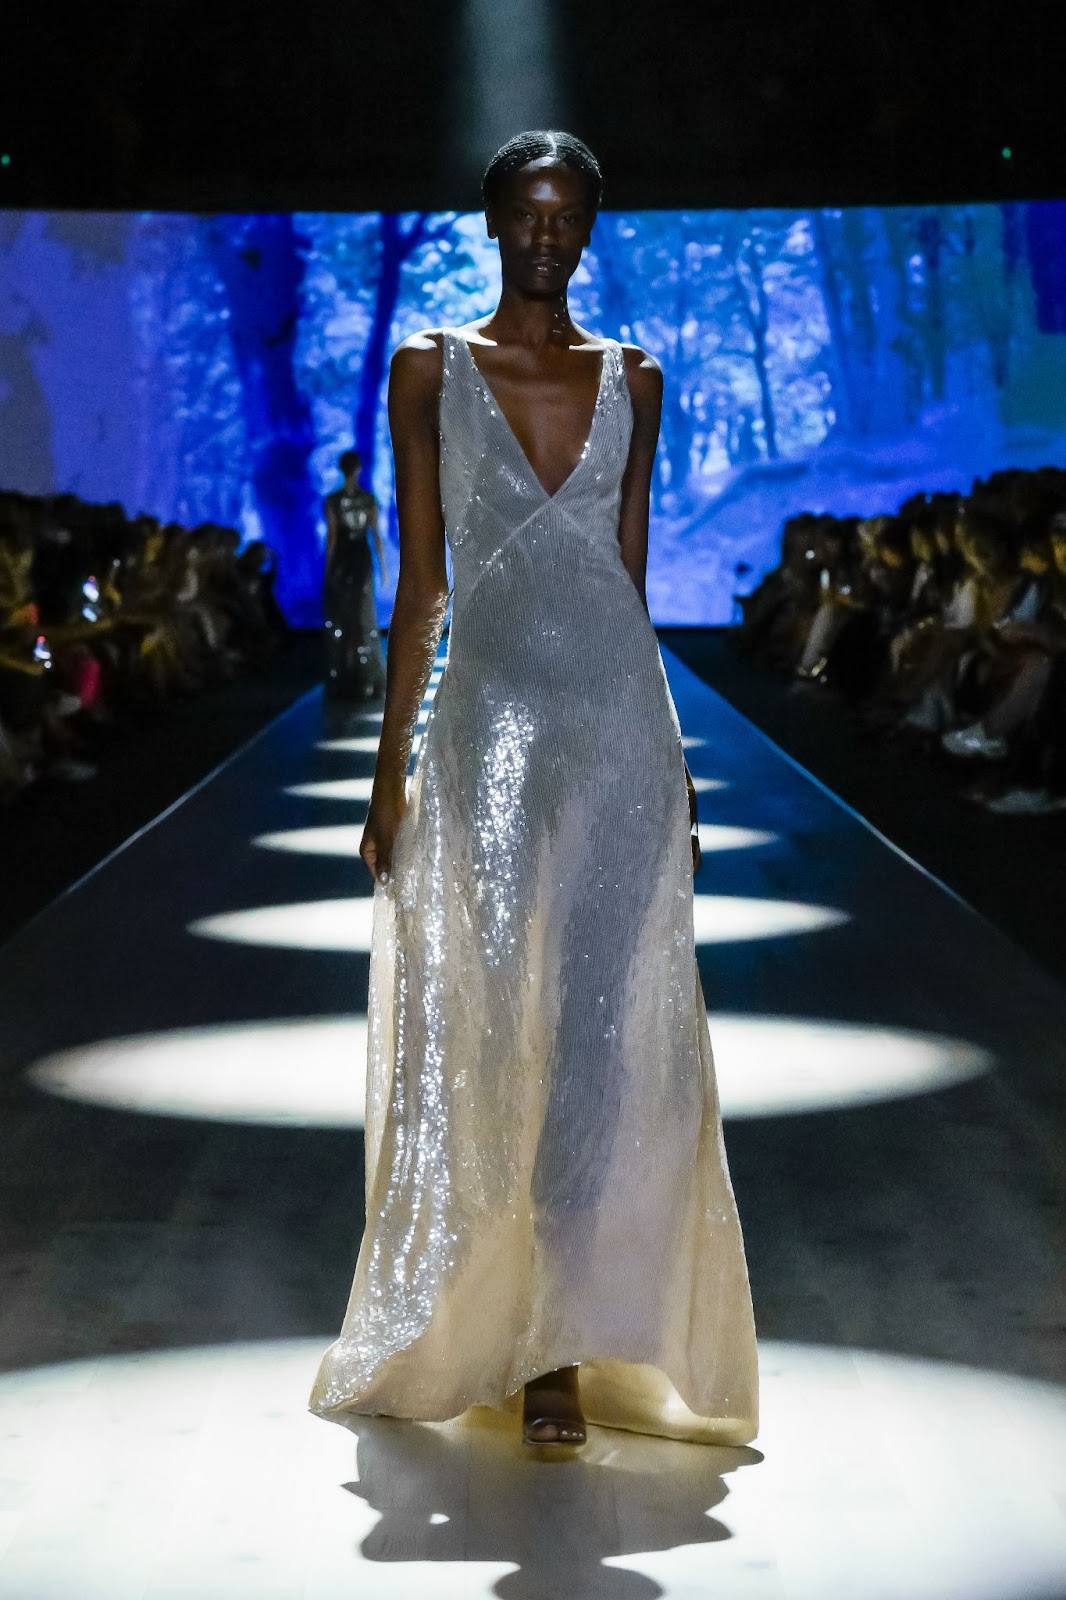 Shine and sparkle in this dress featured on Paolo Sebastian's solo runway.